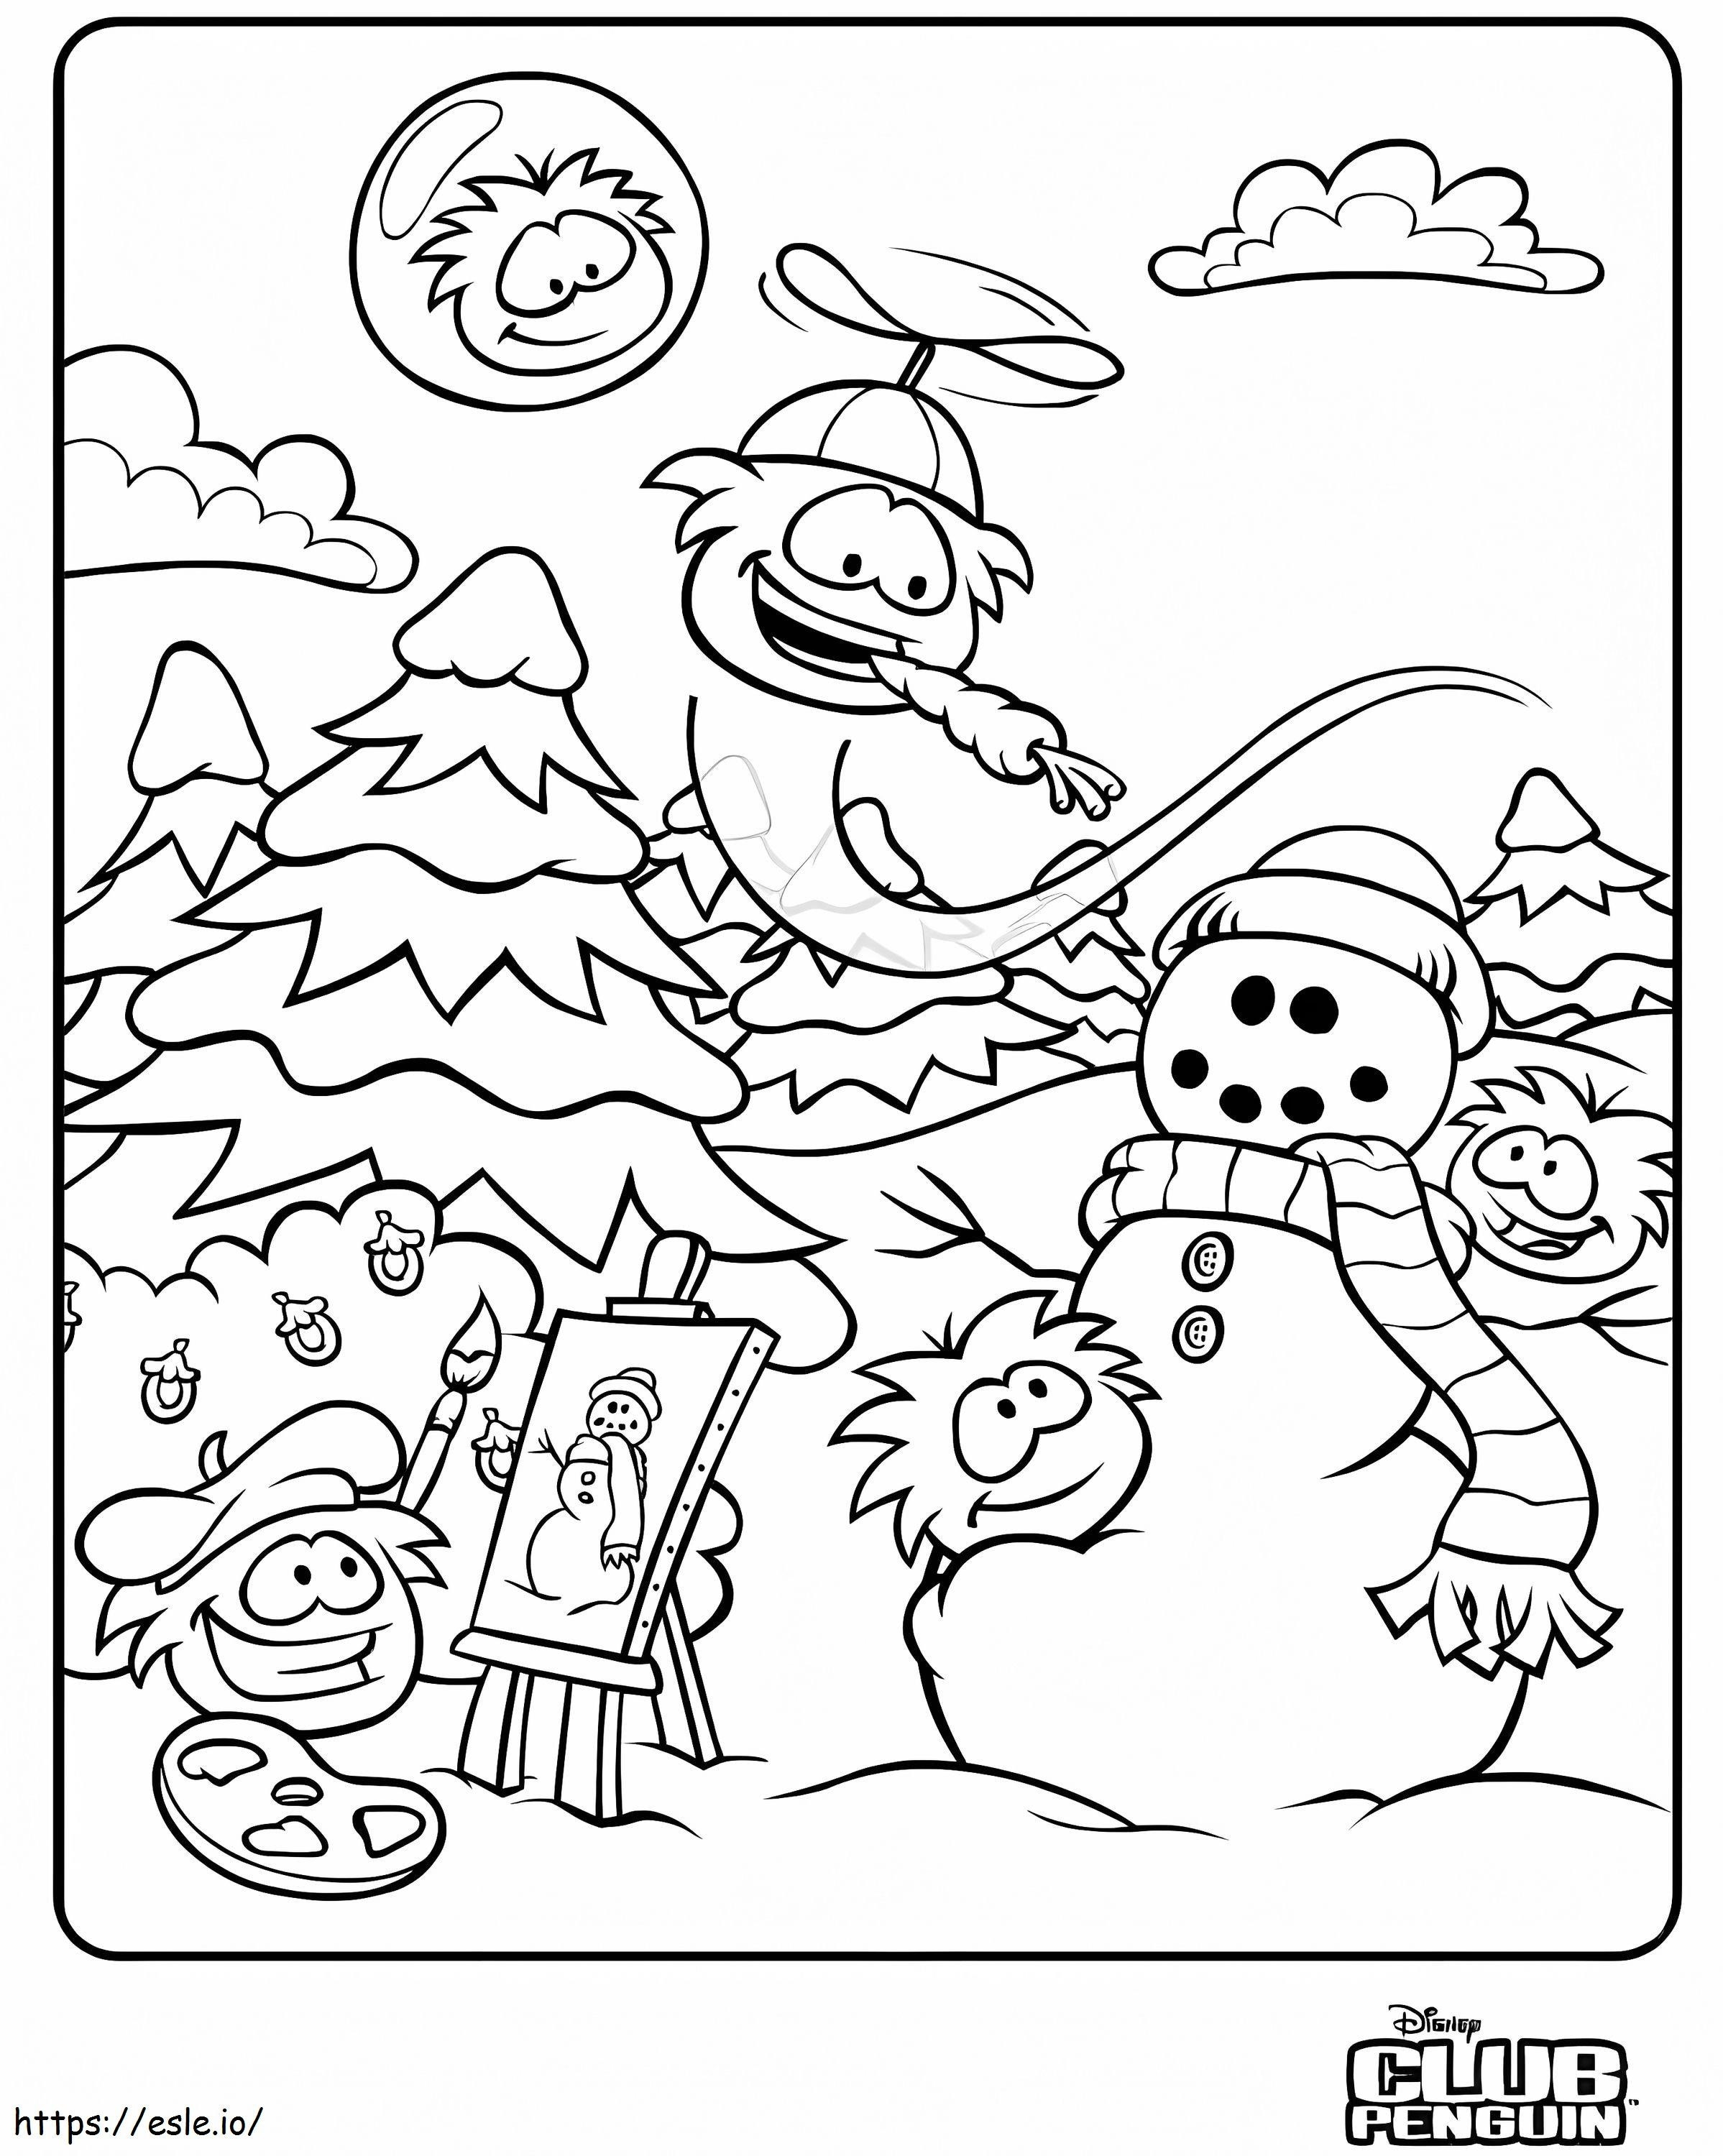 Funny Club Penguin Puffles coloring page